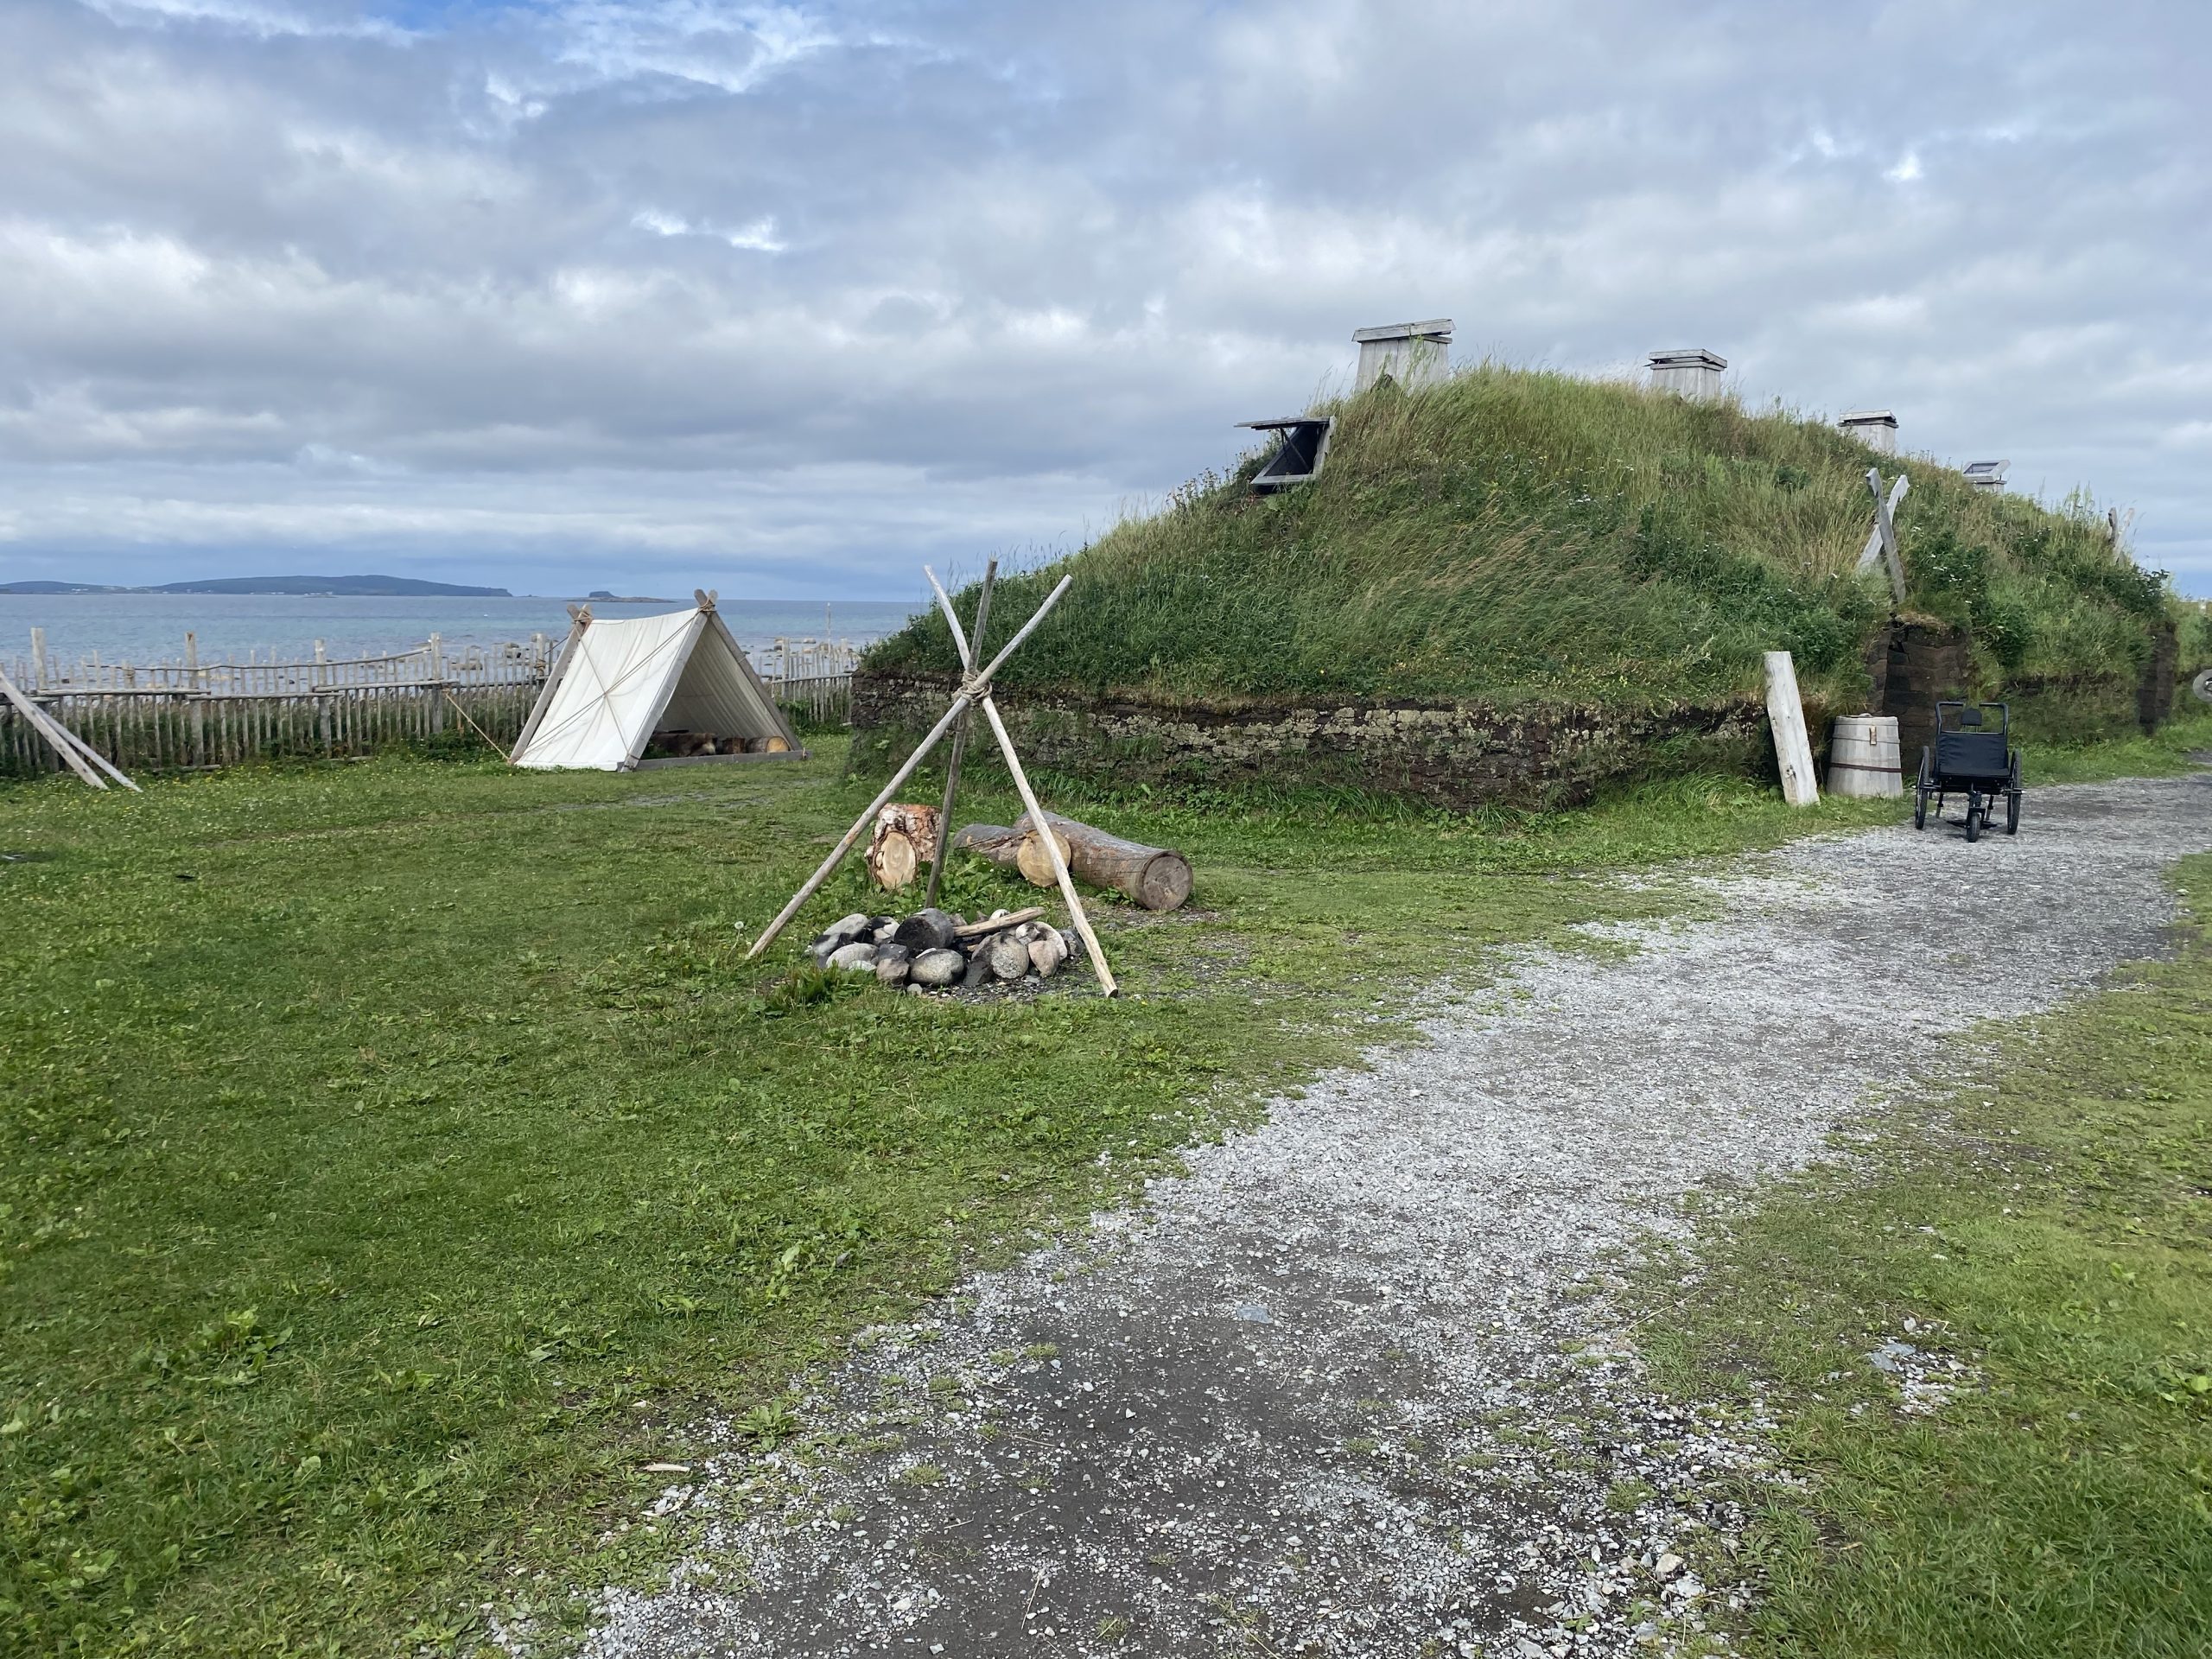 A few out-structures at a re-creation of a 1,000 year old Norse sod house compound.